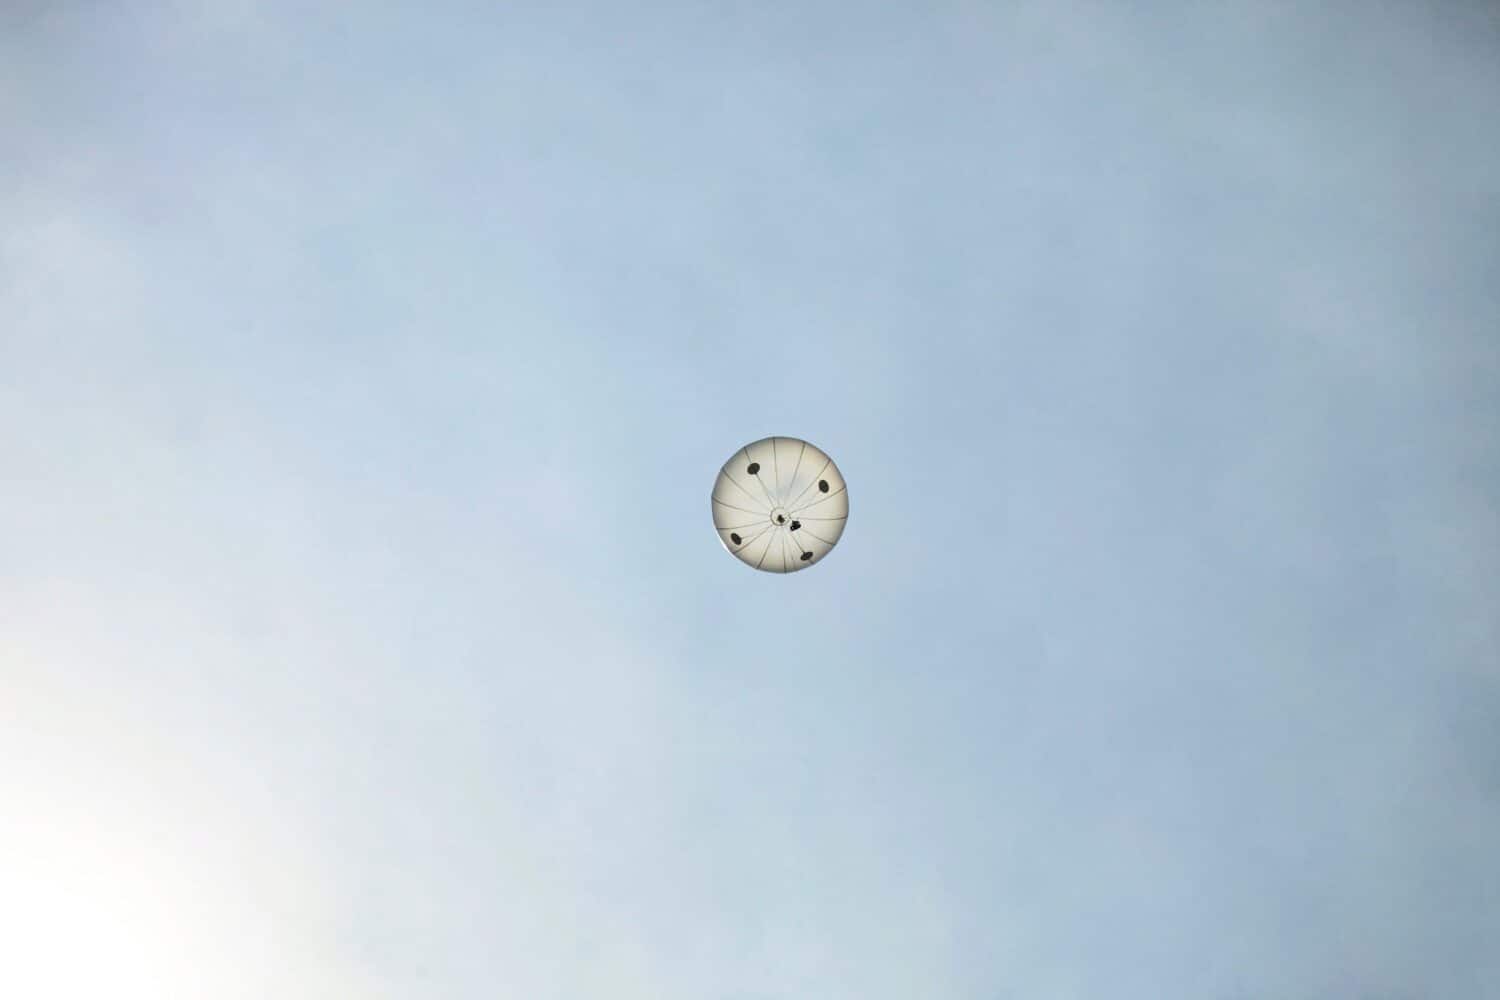 A weather balloon shoots of up into the upper atmosphere to read weather conditions